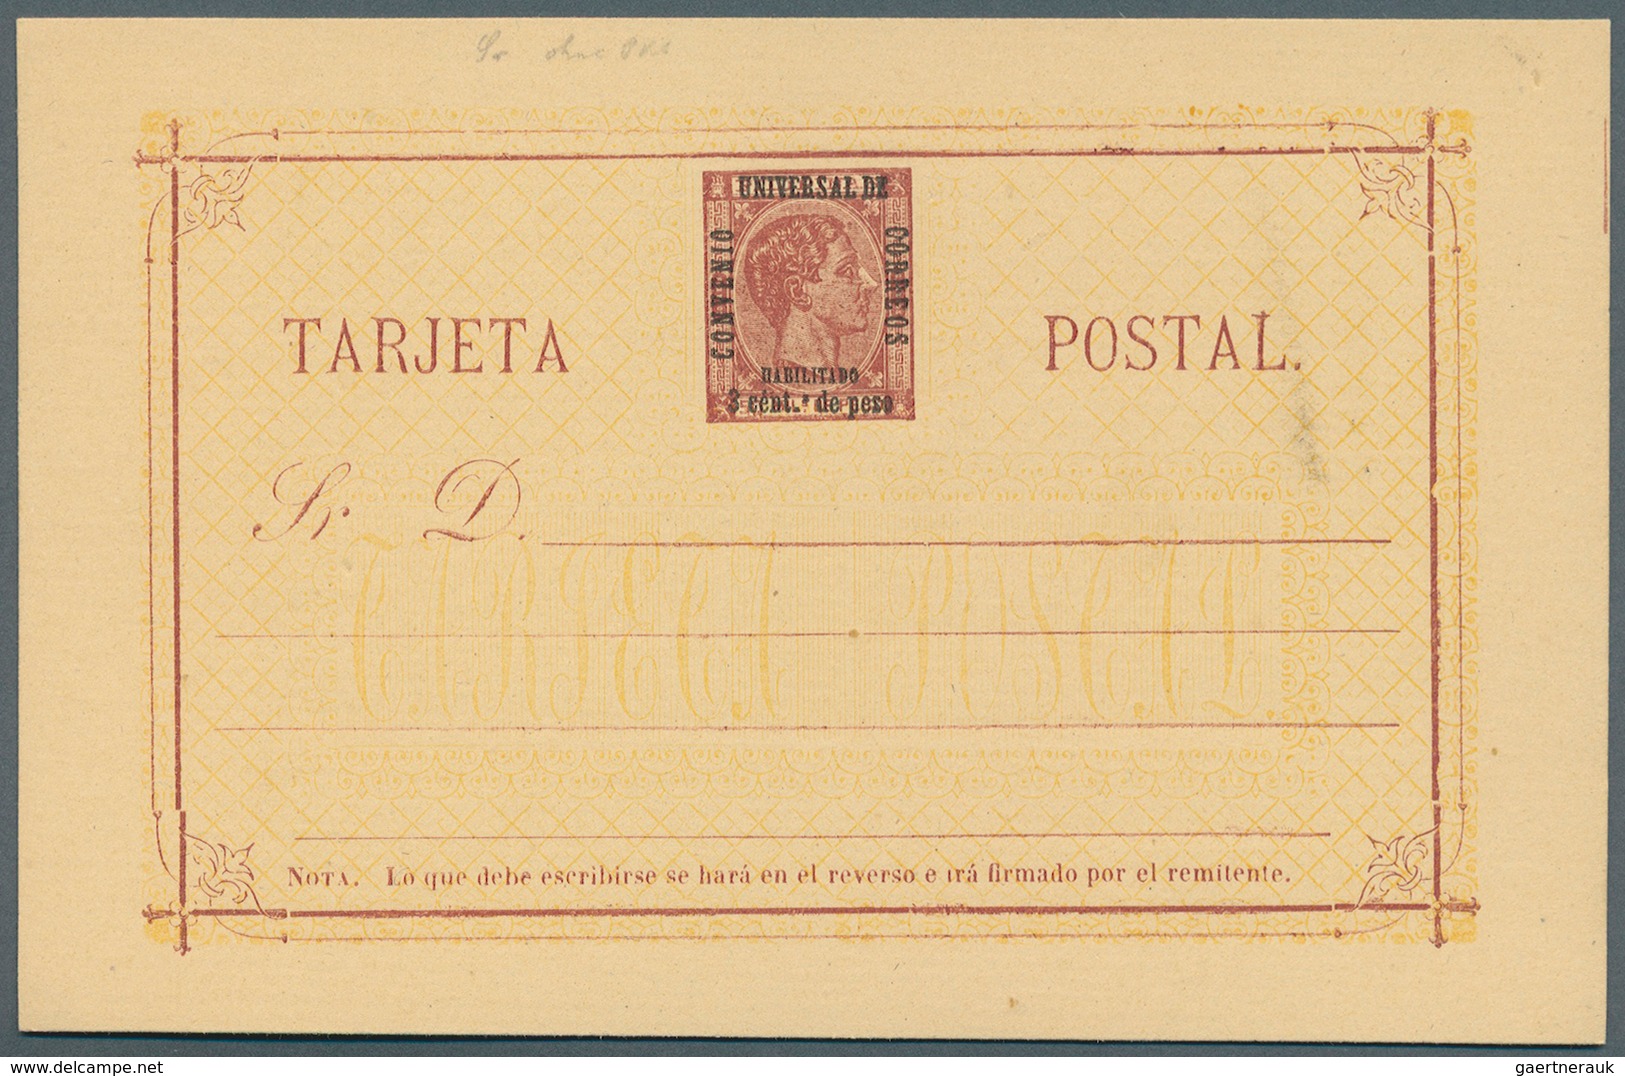 00409 Philippinen: 1880 UPU surcharge 3c/50c, tied by oval cancel of crosses in association with Manila di